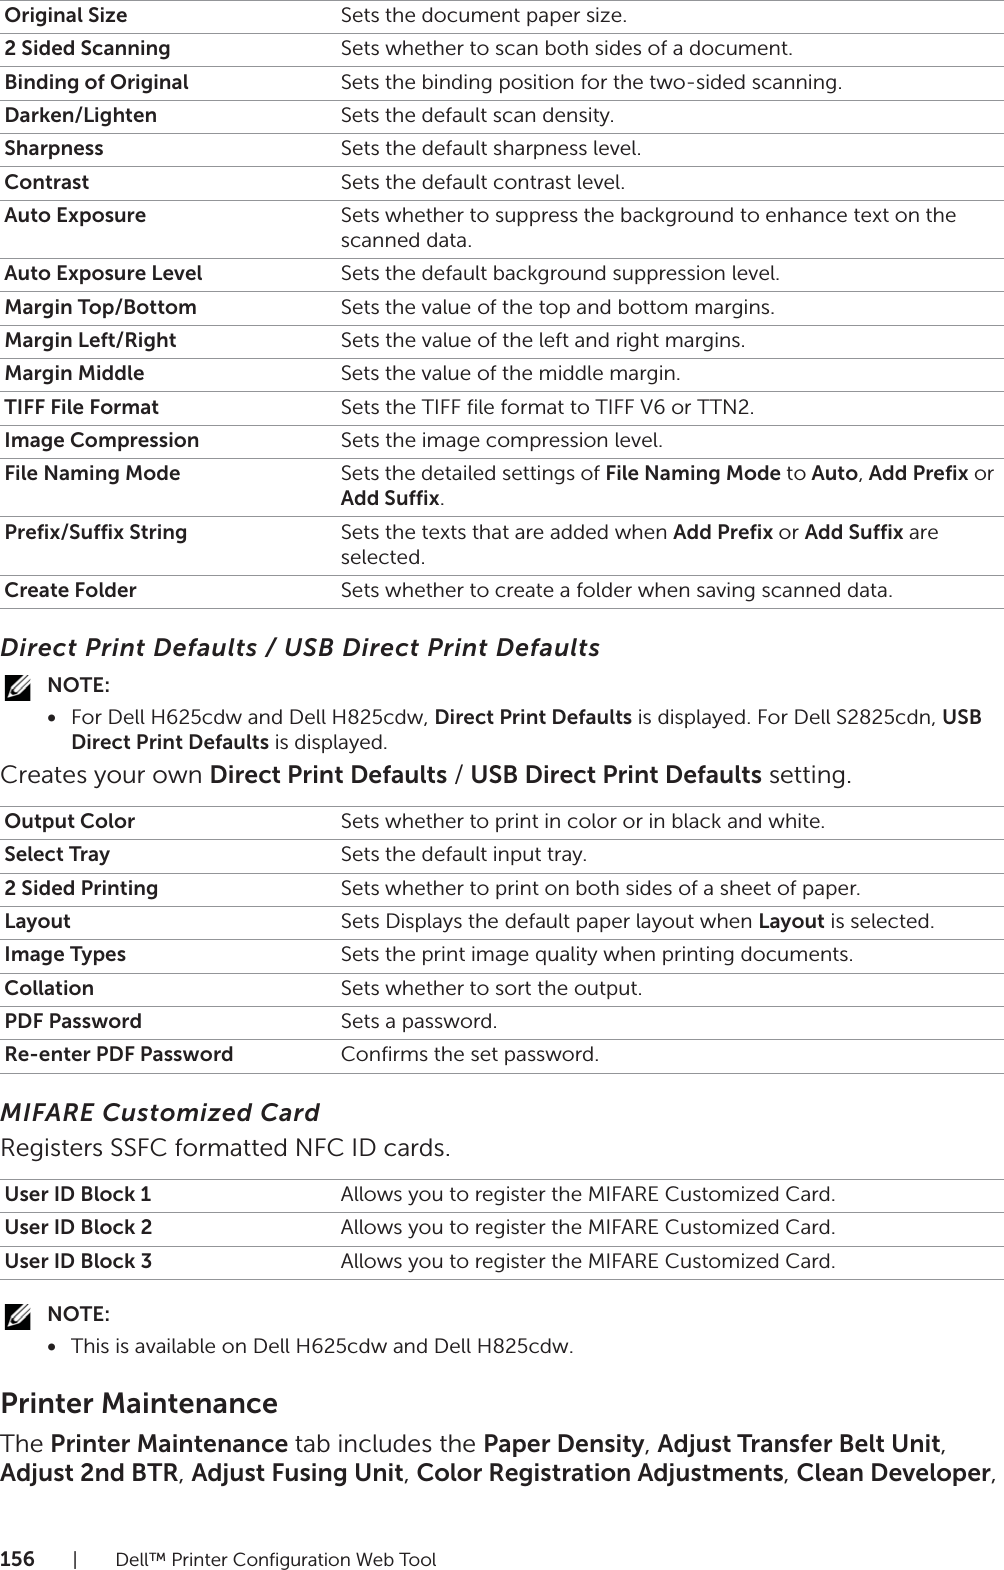 156| Dell™ Printer Configuration Web ToolDirect Print Defaults / USB Direct Print DefaultsNOTE:•For Dell H625cdw and Dell H825cdw, Direct Print Defaults is displayed. For Dell S2825cdn, USB Direct Print Defaults is displayed.Creates your own Direct Print Defaults / USB Direct Print Defaults setting.MIFARE Customized CardRegisters SSFC formatted NFC ID cards.NOTE:•This is available on Dell H625cdw and Dell H825cdw.Printer MaintenanceThe Printer Maintenance tab includes the Paper Density, Adjust Transfer Belt Unit, Adjust 2nd BTR, Adjust Fusing Unit, Color Registration Adjustments, Clean Developer, Original Size Sets the document paper size.2 Sided Scanning Sets whether to scan both sides of a document.Binding of Original Sets the binding position for the two-sided scanning.Darken/Lighten Sets the default scan density.Sharpness Sets the default sharpness level.Contrast Sets the default contrast level.Auto Exposure Sets whether to suppress the background to enhance text on the scanned data.Auto Exposure Level Sets the default background suppression level.Margin Top/Bottom Sets the value of the top and bottom margins.Margin Left/Right Sets the value of the left and right margins.Margin Middle Sets the value of the middle margin.TIFF File Format Sets the TIFF file format to TIFF V6 or TTN2.Image Compression Sets the image compression level.File Naming Mode Sets the detailed settings of File Naming Mode to Auto, Add Prefix or Add Suffix.Prefix/Suffix String Sets the texts that are added when Add Prefix or Add Suffix are selected.Create Folder Sets whether to create a folder when saving scanned data.Output Color Sets whether to print in color or in black and white.Select Tray Sets the default input tray.2 Sided Printing Sets whether to print on both sides of a sheet of paper.Layout Sets Displays the default paper layout when Layout is selected.Image Types Sets the print image quality when printing documents.Collation Sets whether to sort the output.PDF Password Sets a password.Re-enter PDF Password Confirms the set password.User ID Block 1 Allows you to register the MIFARE Customized Card.User ID Block 2 Allows you to register the MIFARE Customized Card.User ID Block 3 Allows you to register the MIFARE Customized Card.